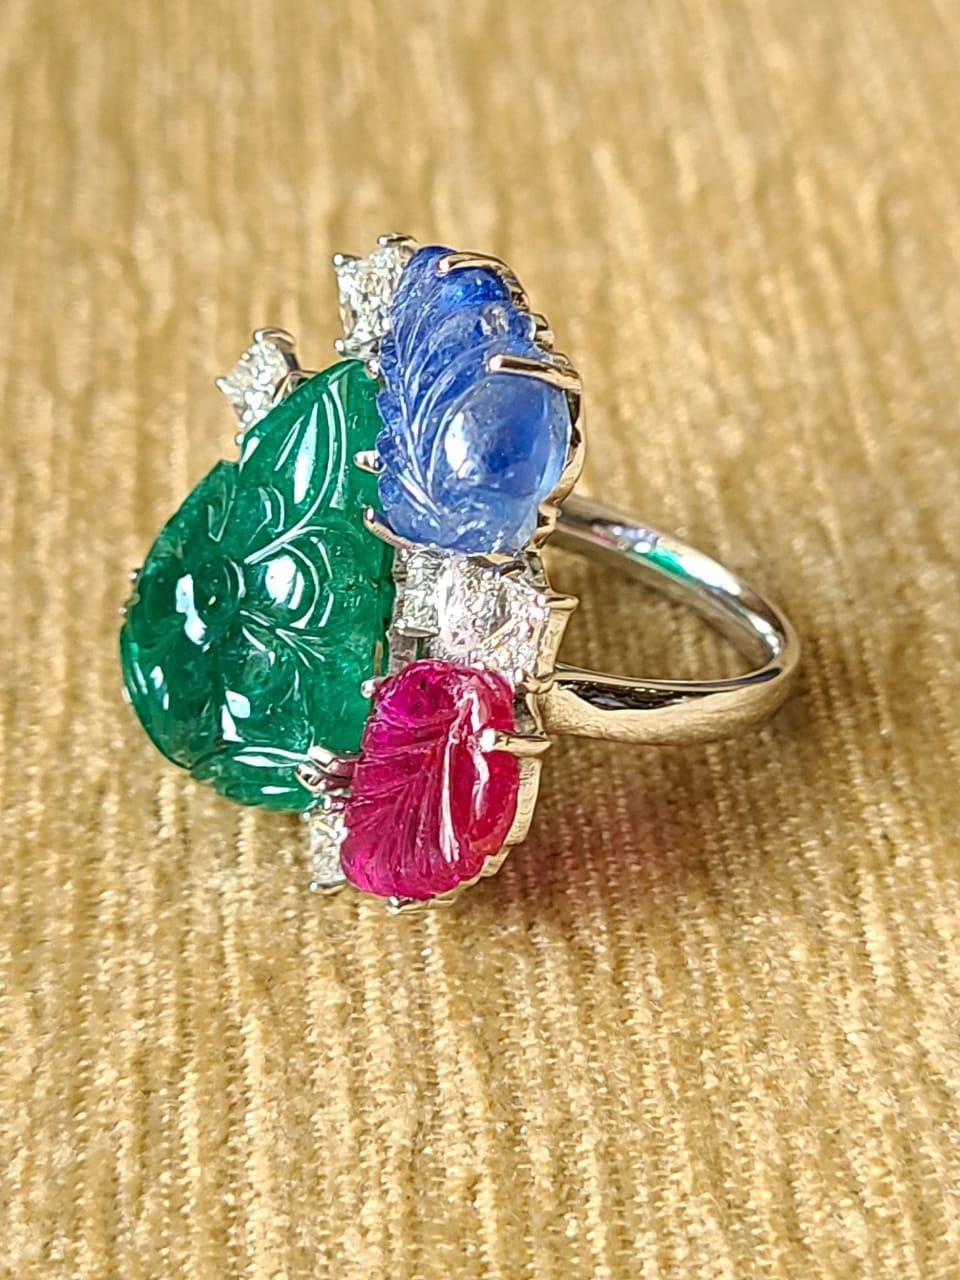 A very wearable and one of a kind, natural carved Emerald, Blue Sapphire & Ruby Cocktail Ring set in 18K Gold & Diamonds. The weight of the Emerald is 11.03 carats and of Zambian origin. The weight of the Blue Sapphire is 5.54 carats and is of